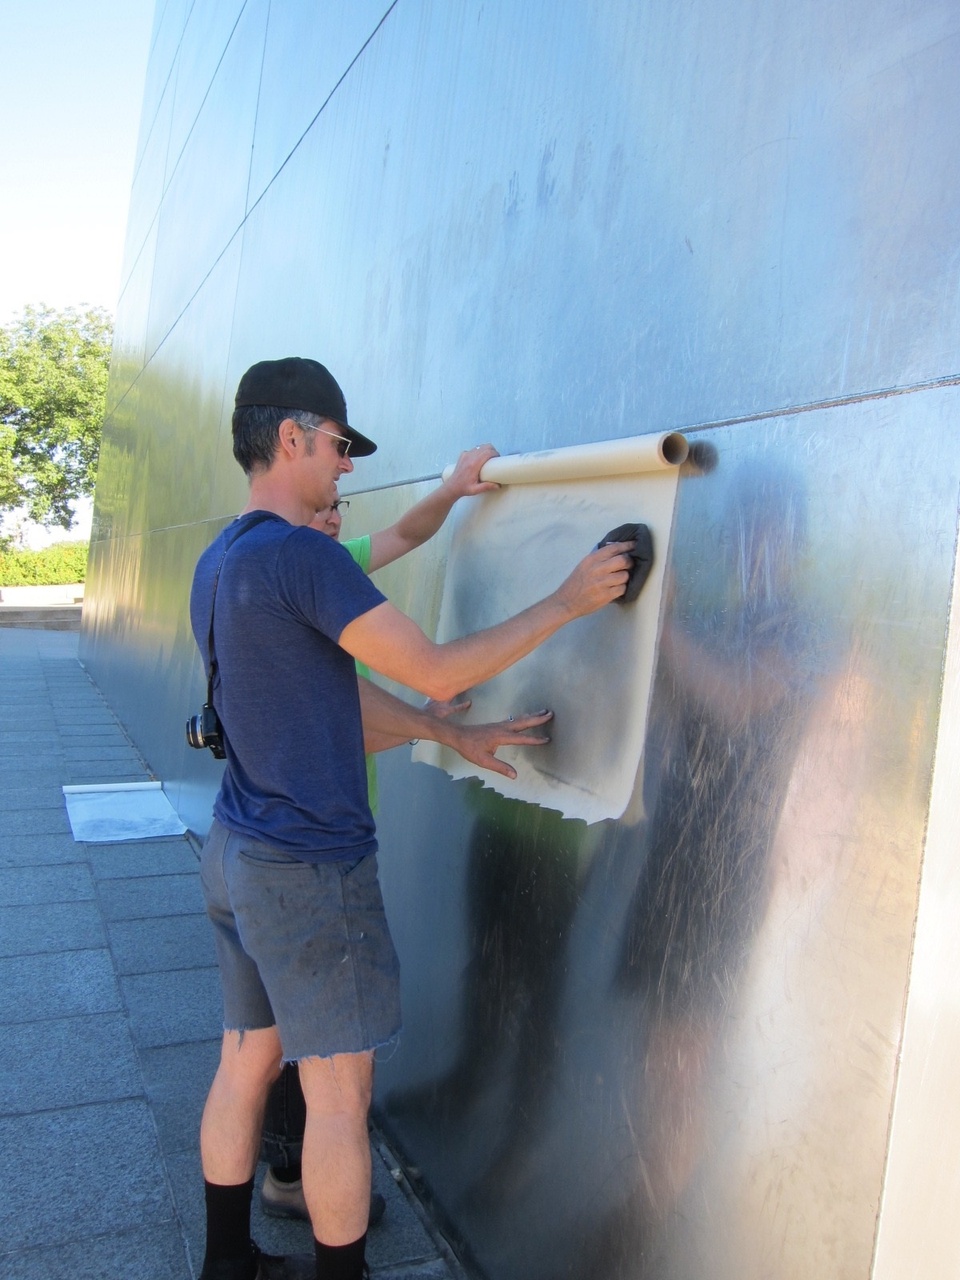 Shaun placing a large sheet of paper flat by the side of a building while rubbing a bunched up cloth over it